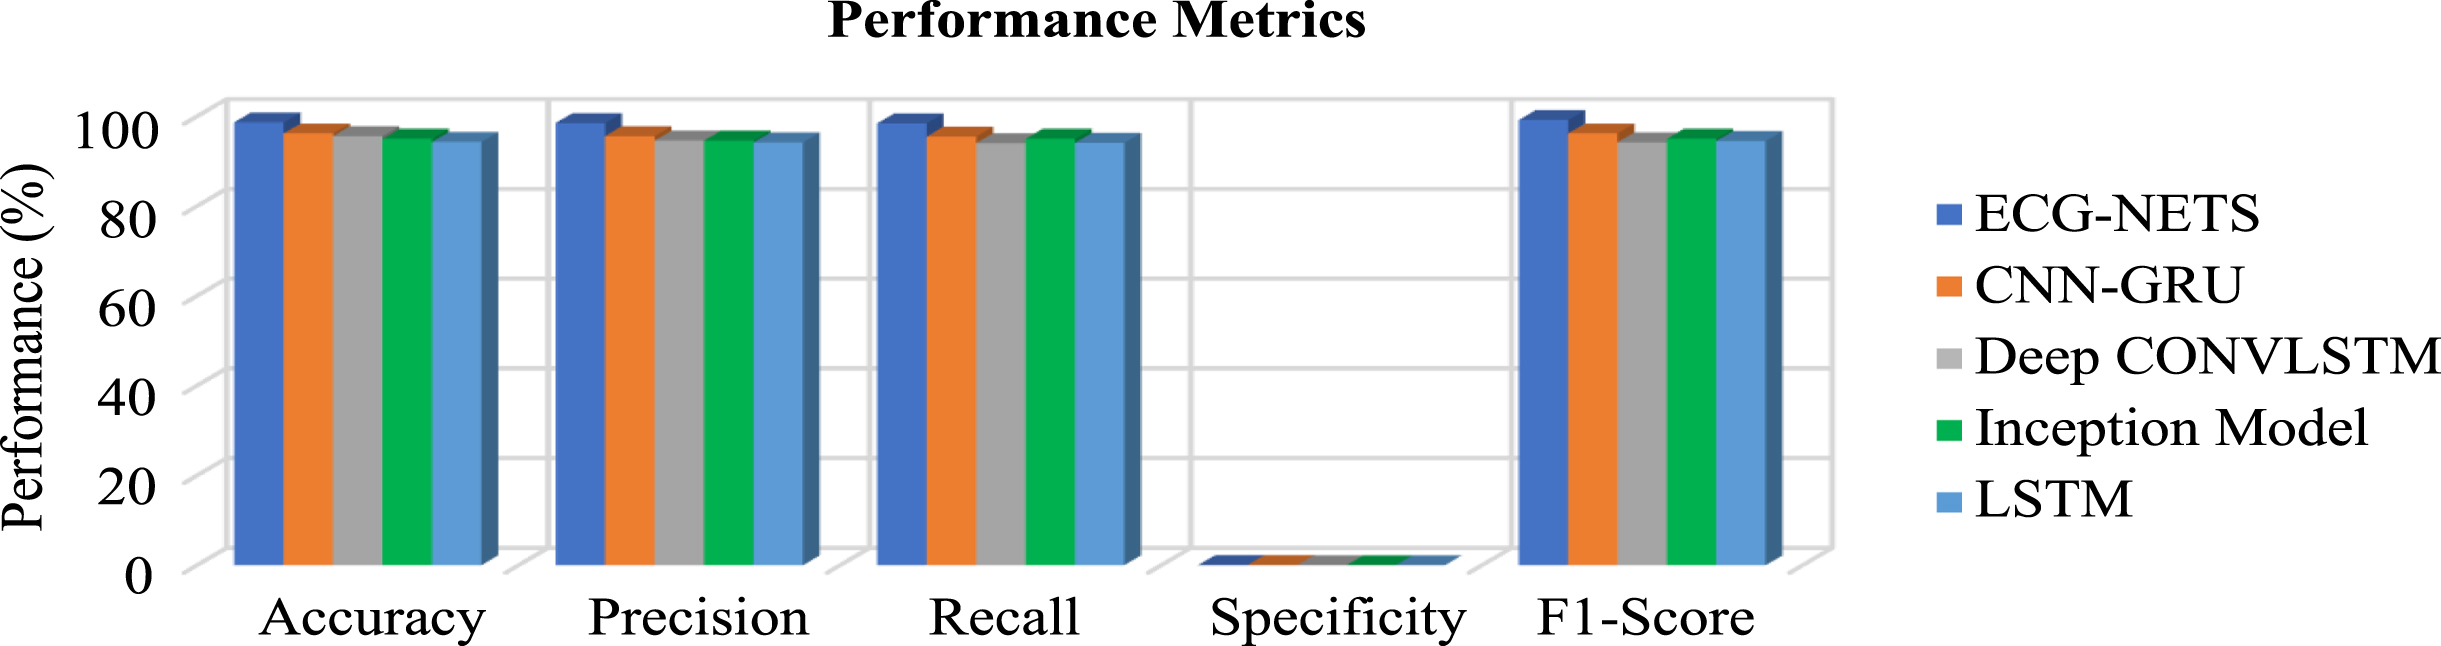 Performance metrics comparison for exiting methods in detecting leg related eating activities (real time datasets).